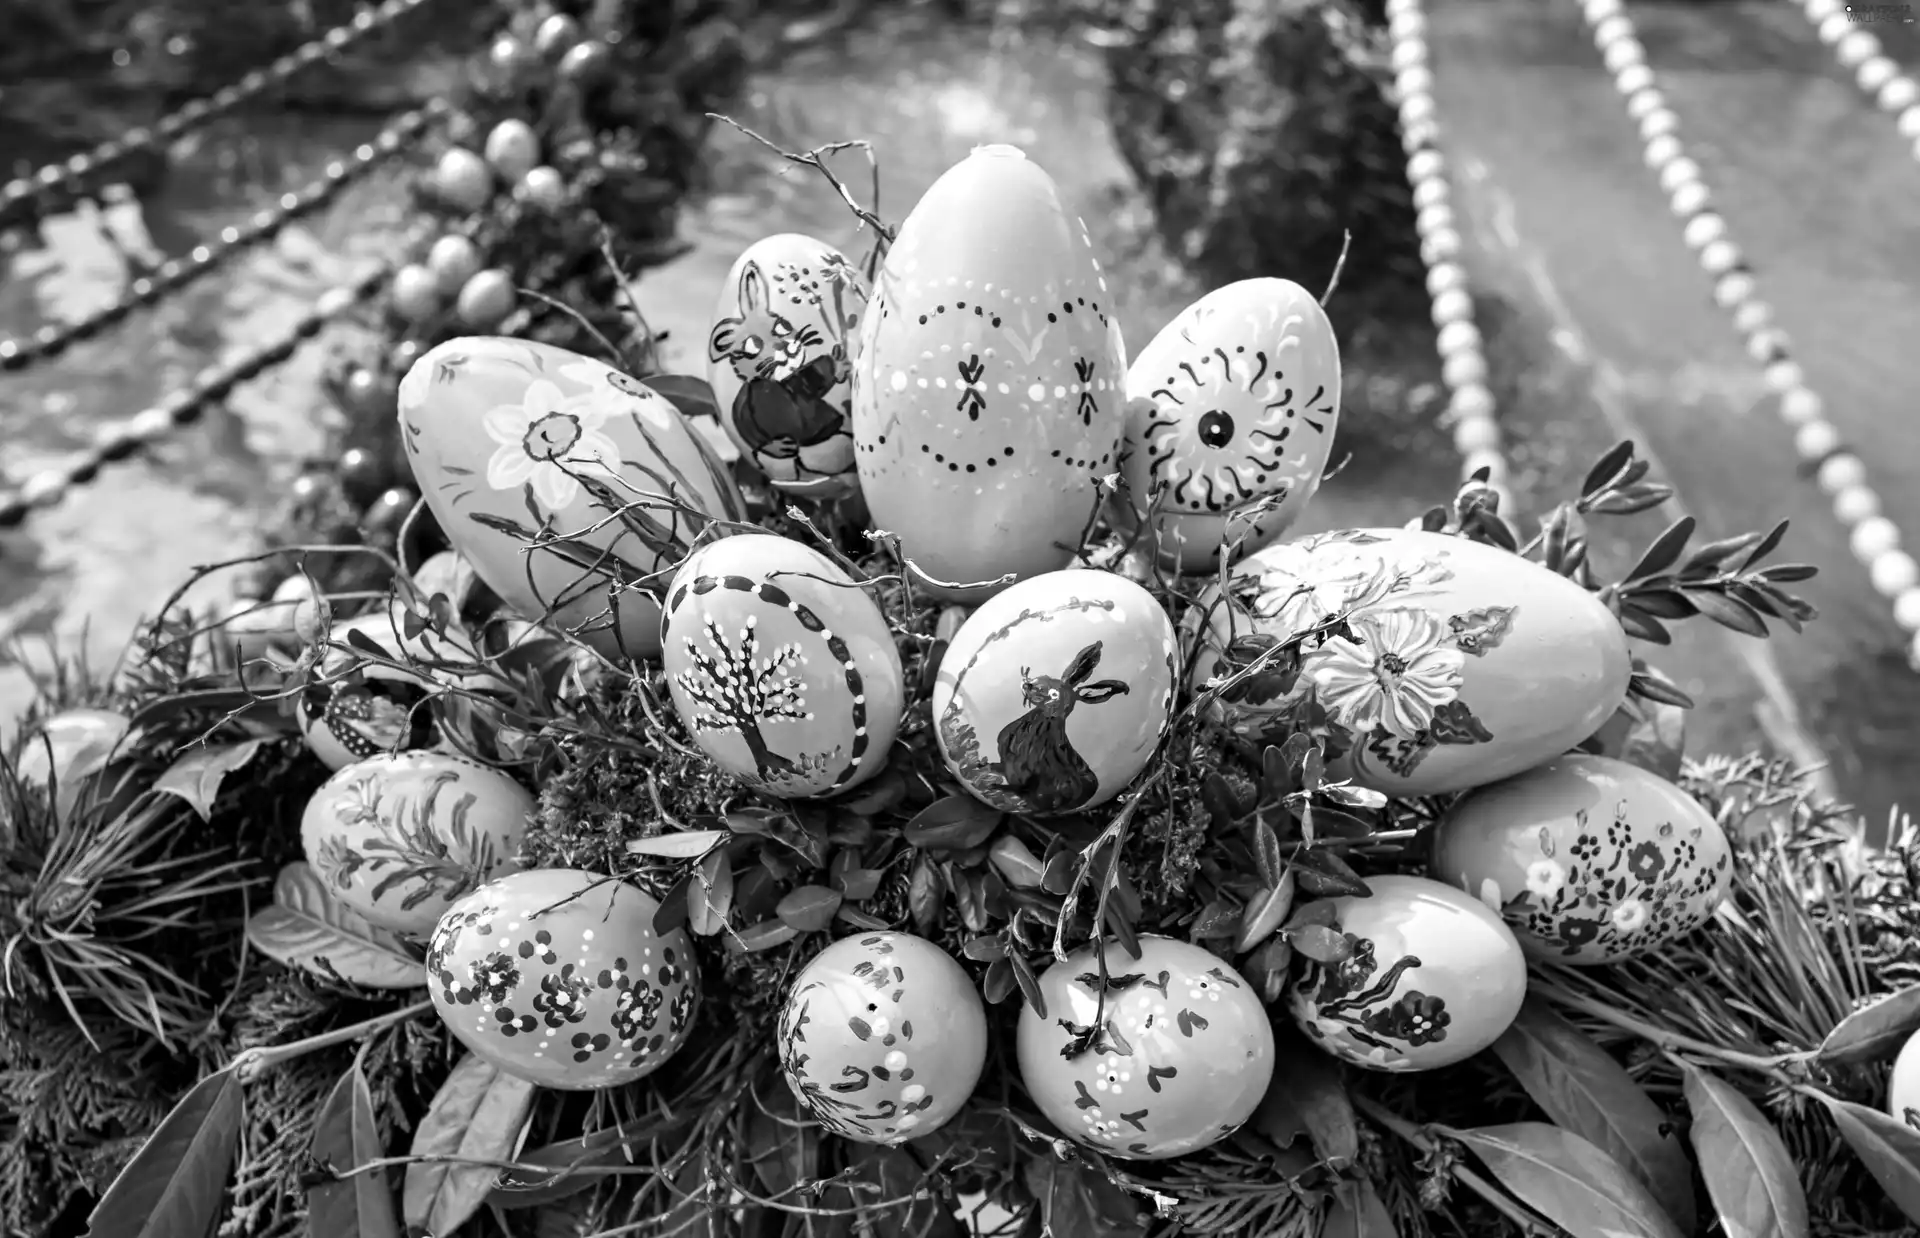 eggs, Easter, color